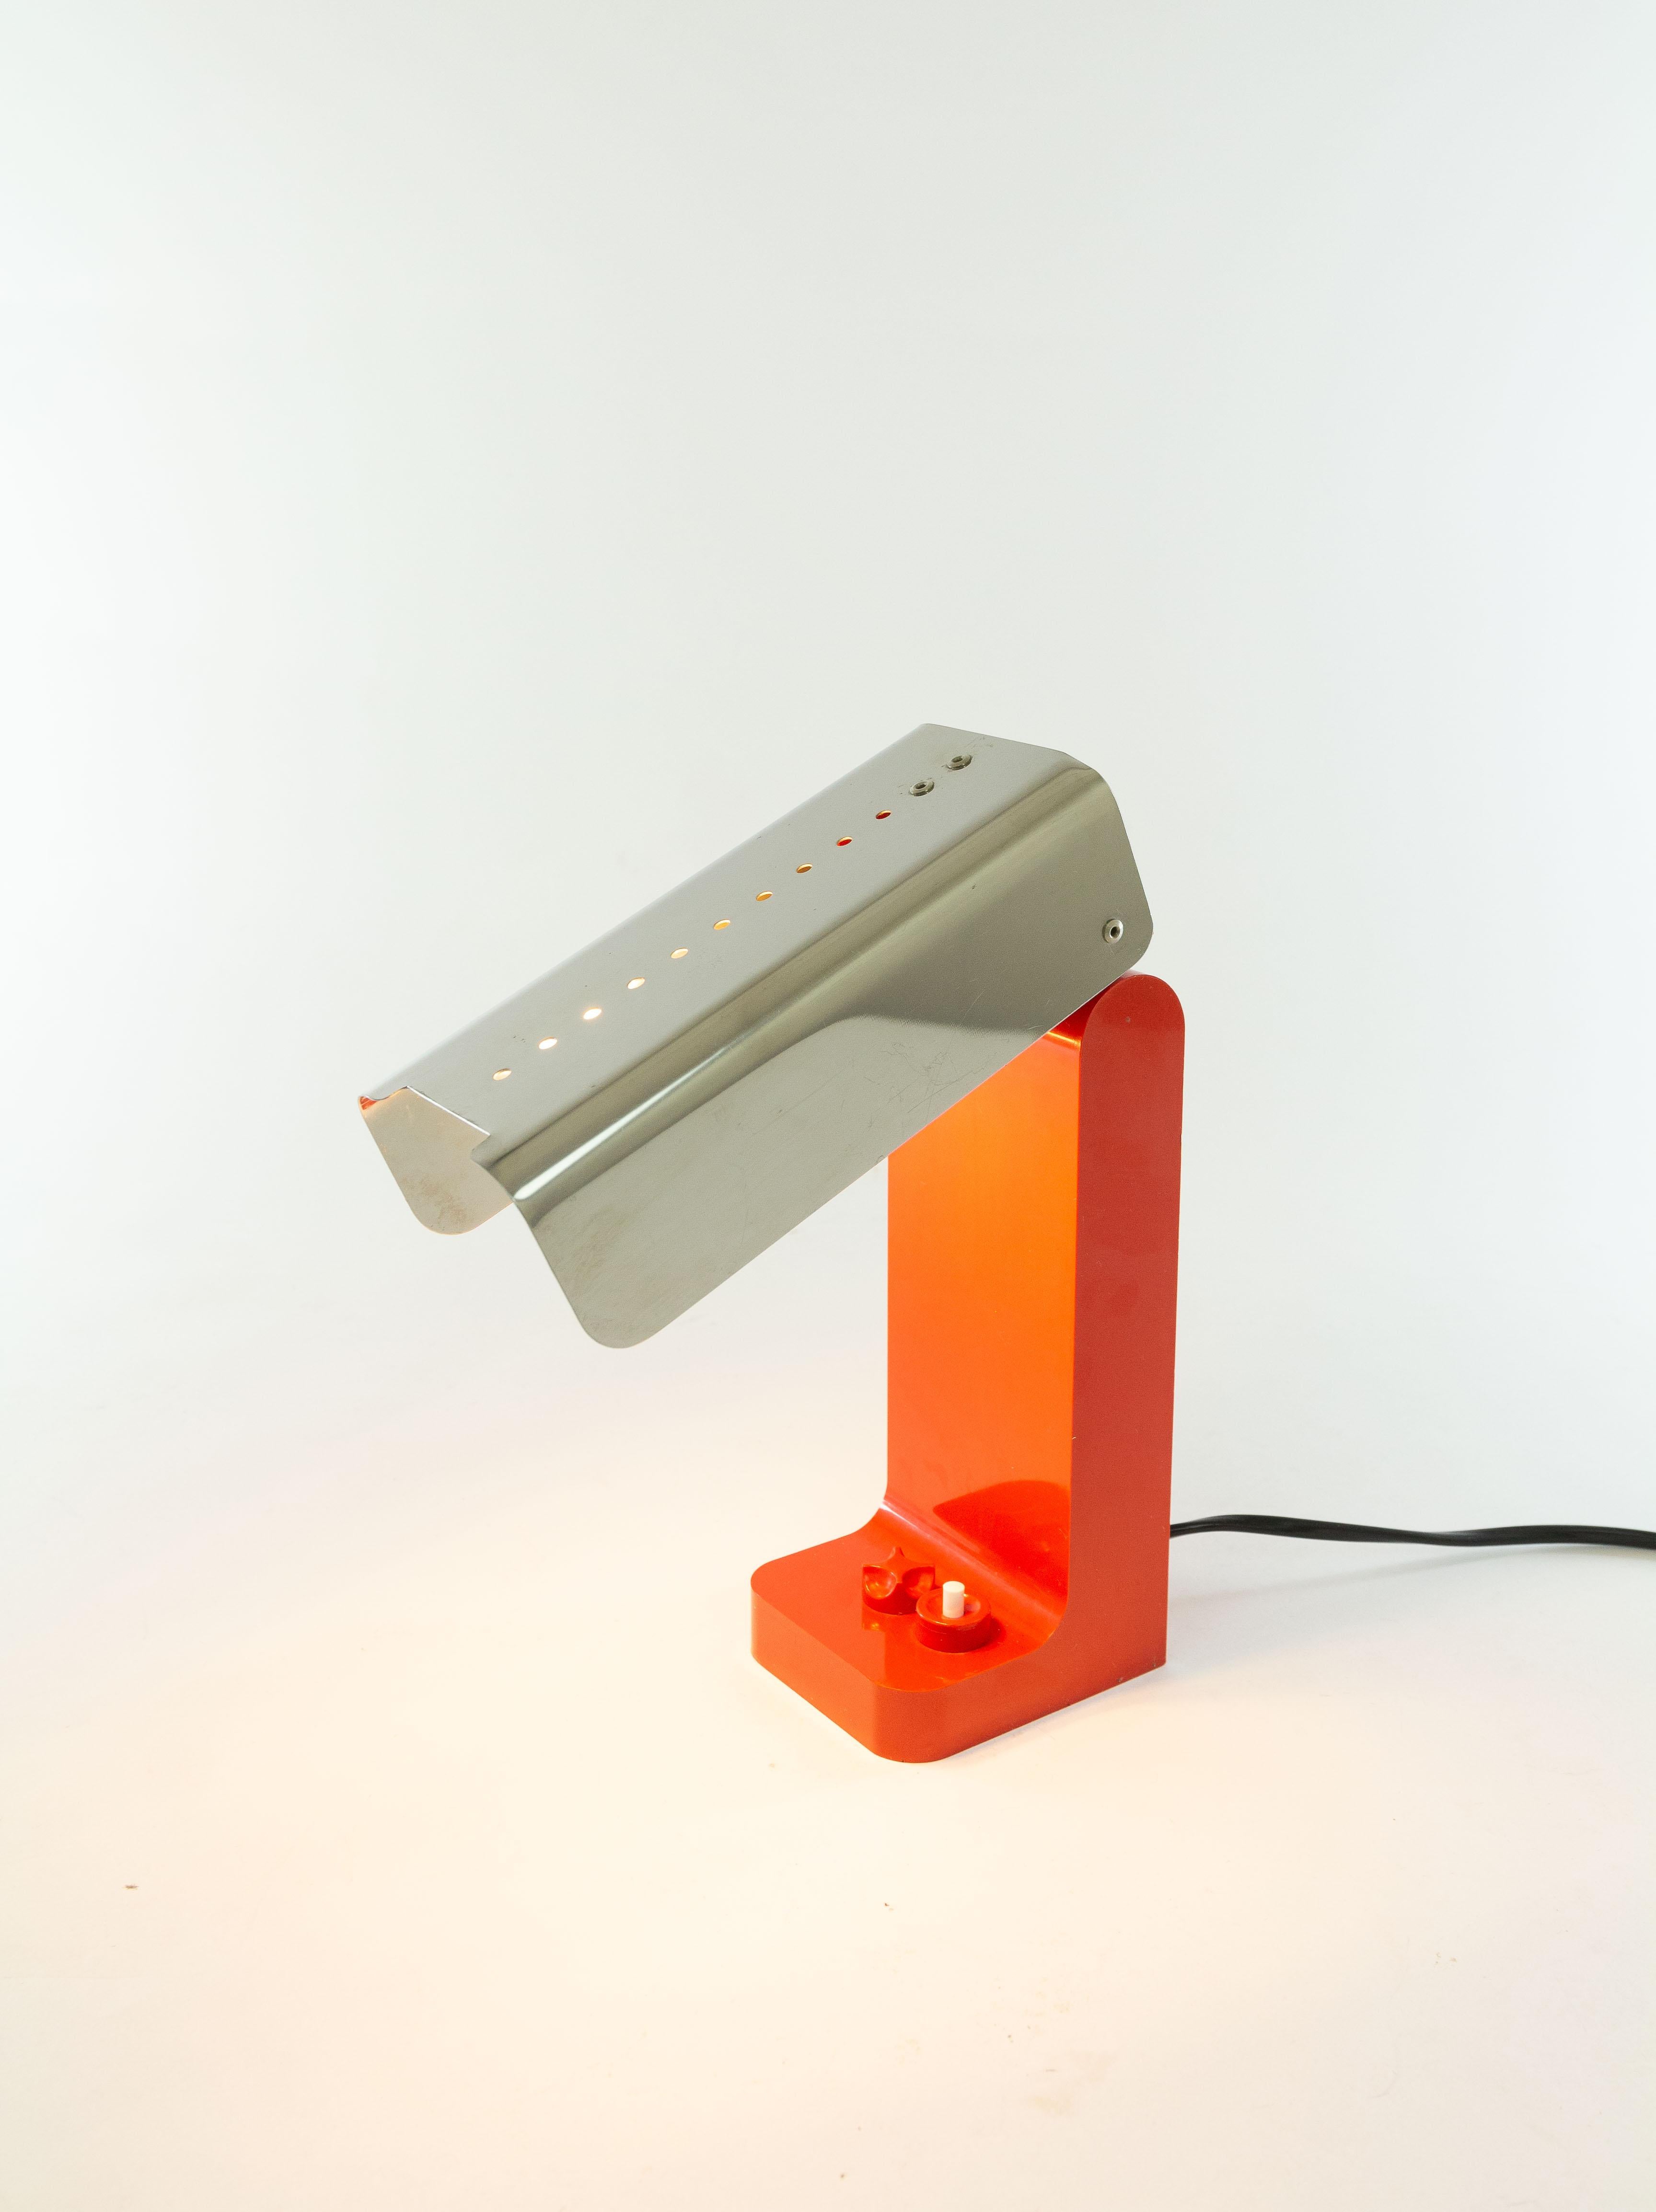 Red Vademecum (model 4034) table lamp designed by Joe Colombo in 1968 and manufactured by Kartell.

The Vademecum lamp is made of a plastic base and a stainless steel arm or shade. This part is adjustable and can even be completely folded. The